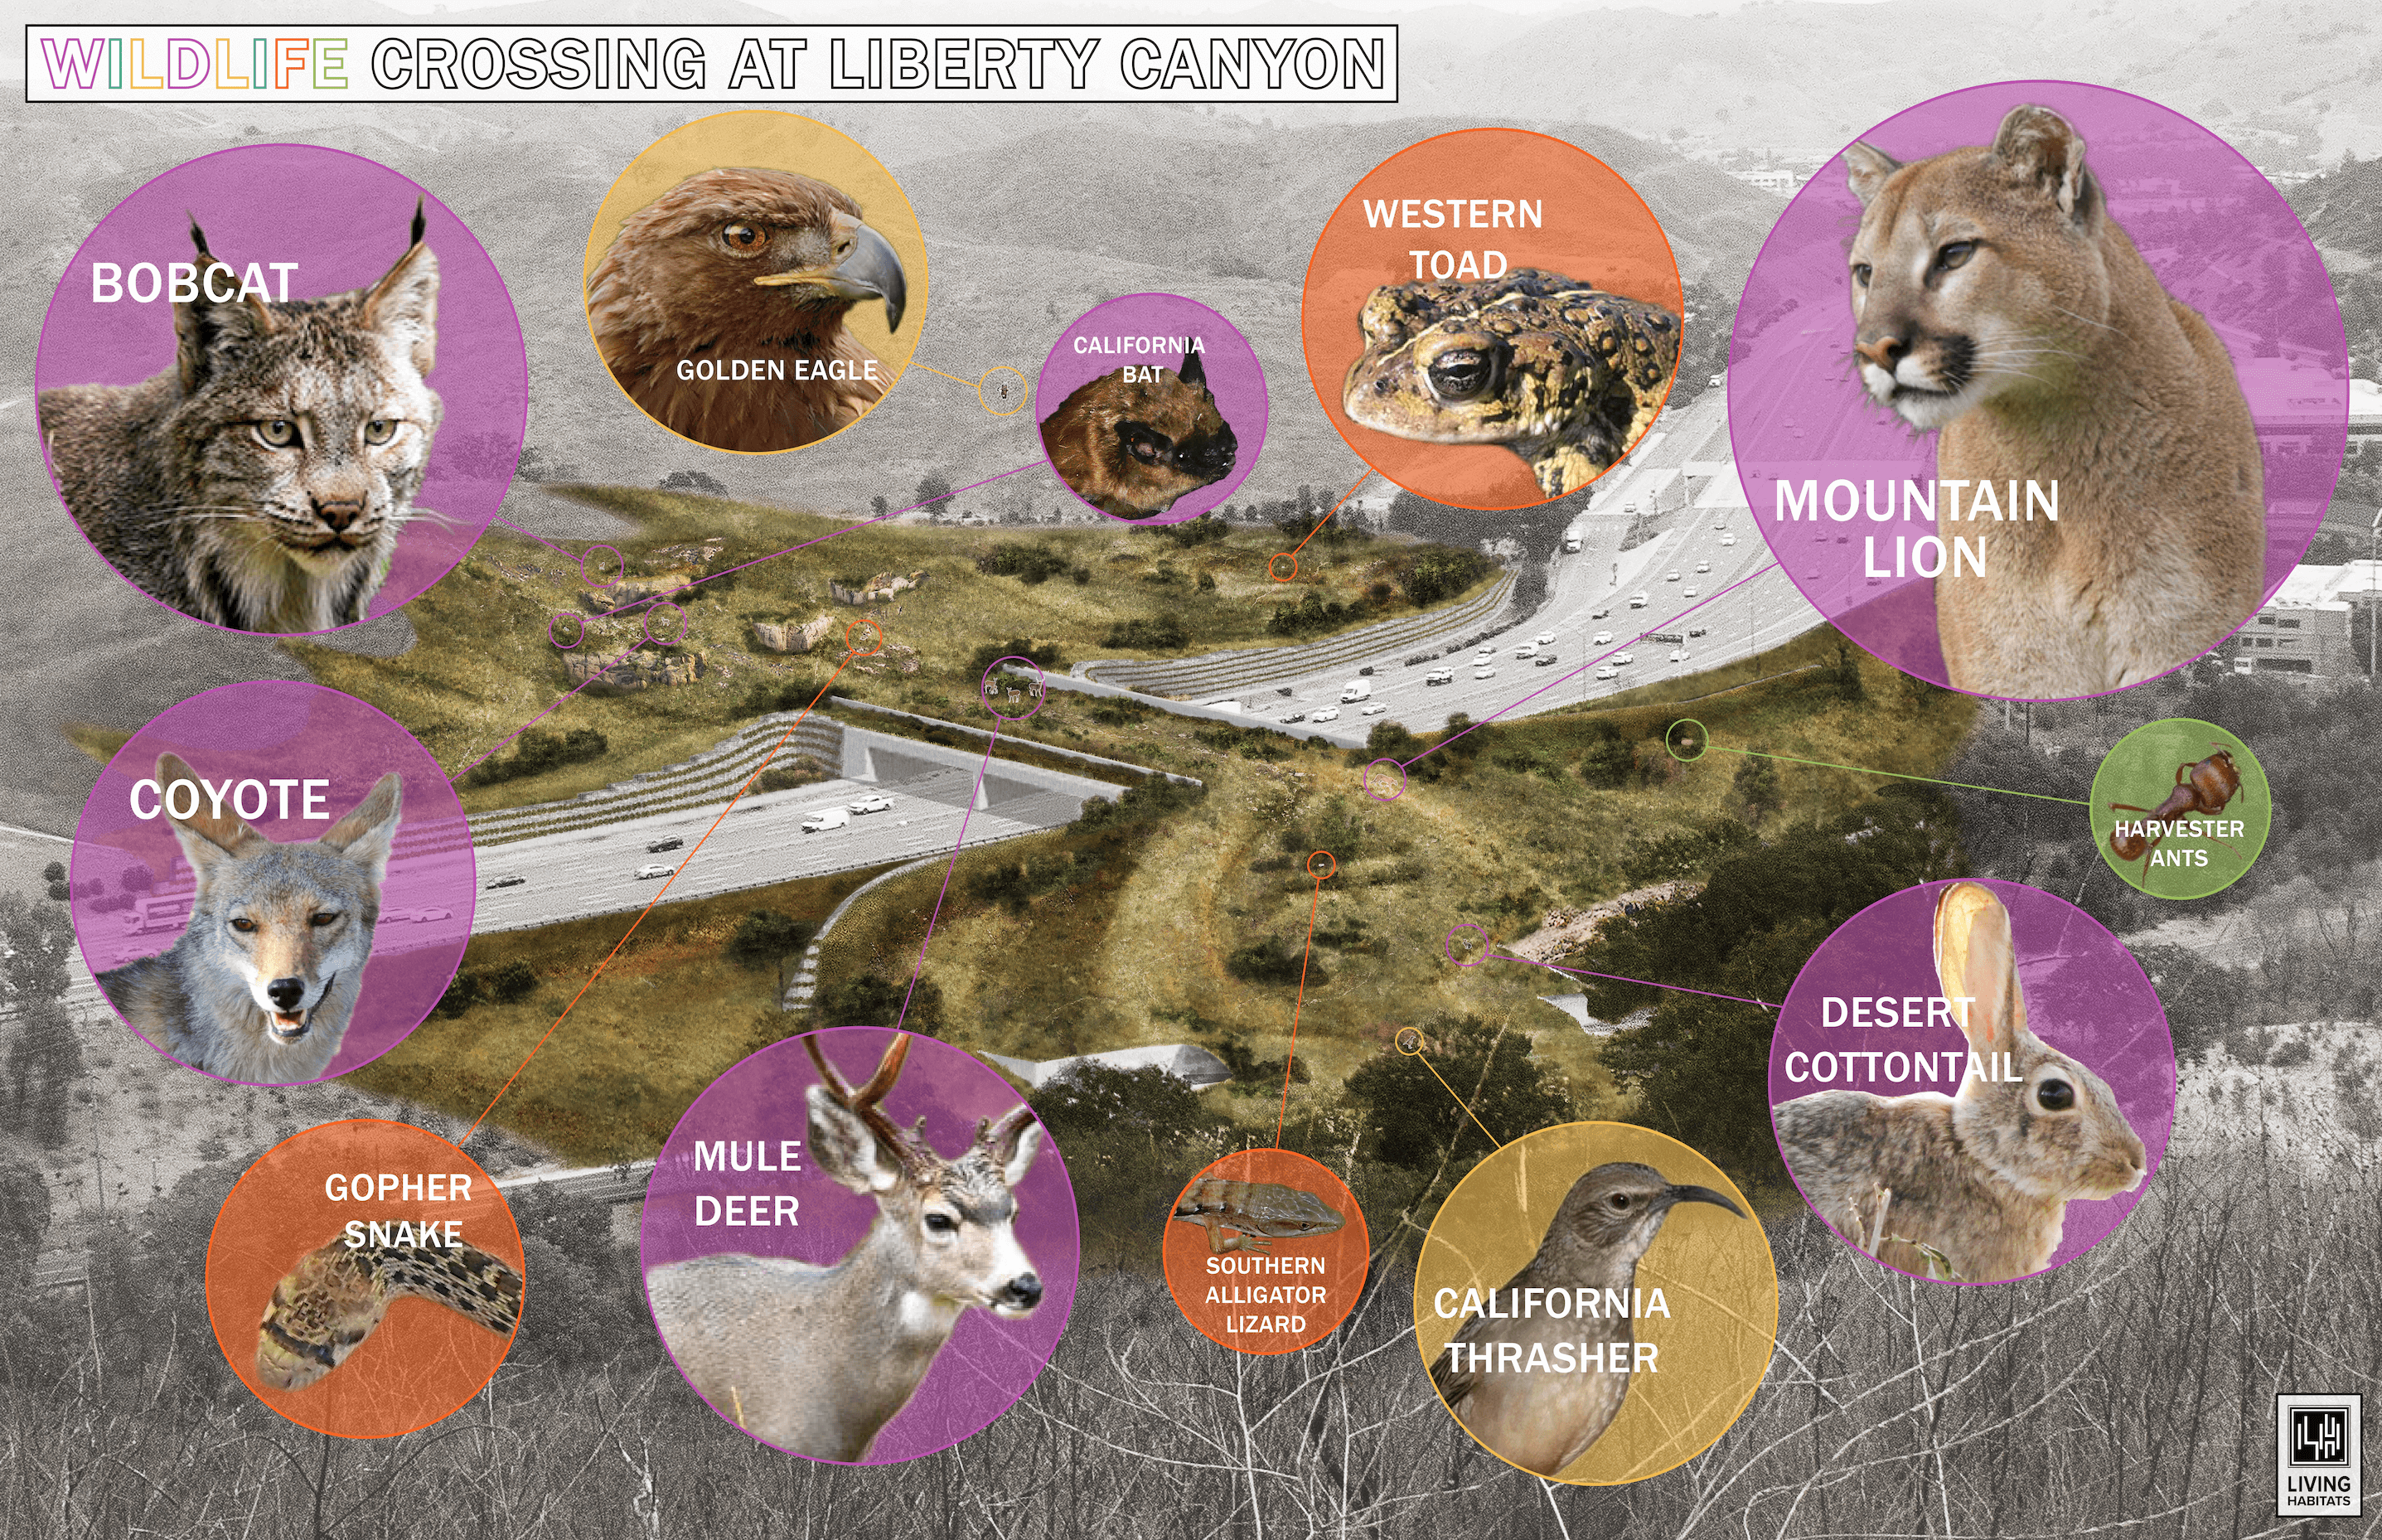 An infographic indicating which species will benefit from the Liberty Canyon Wildlife Crossing, including eagles, coyotes, and more